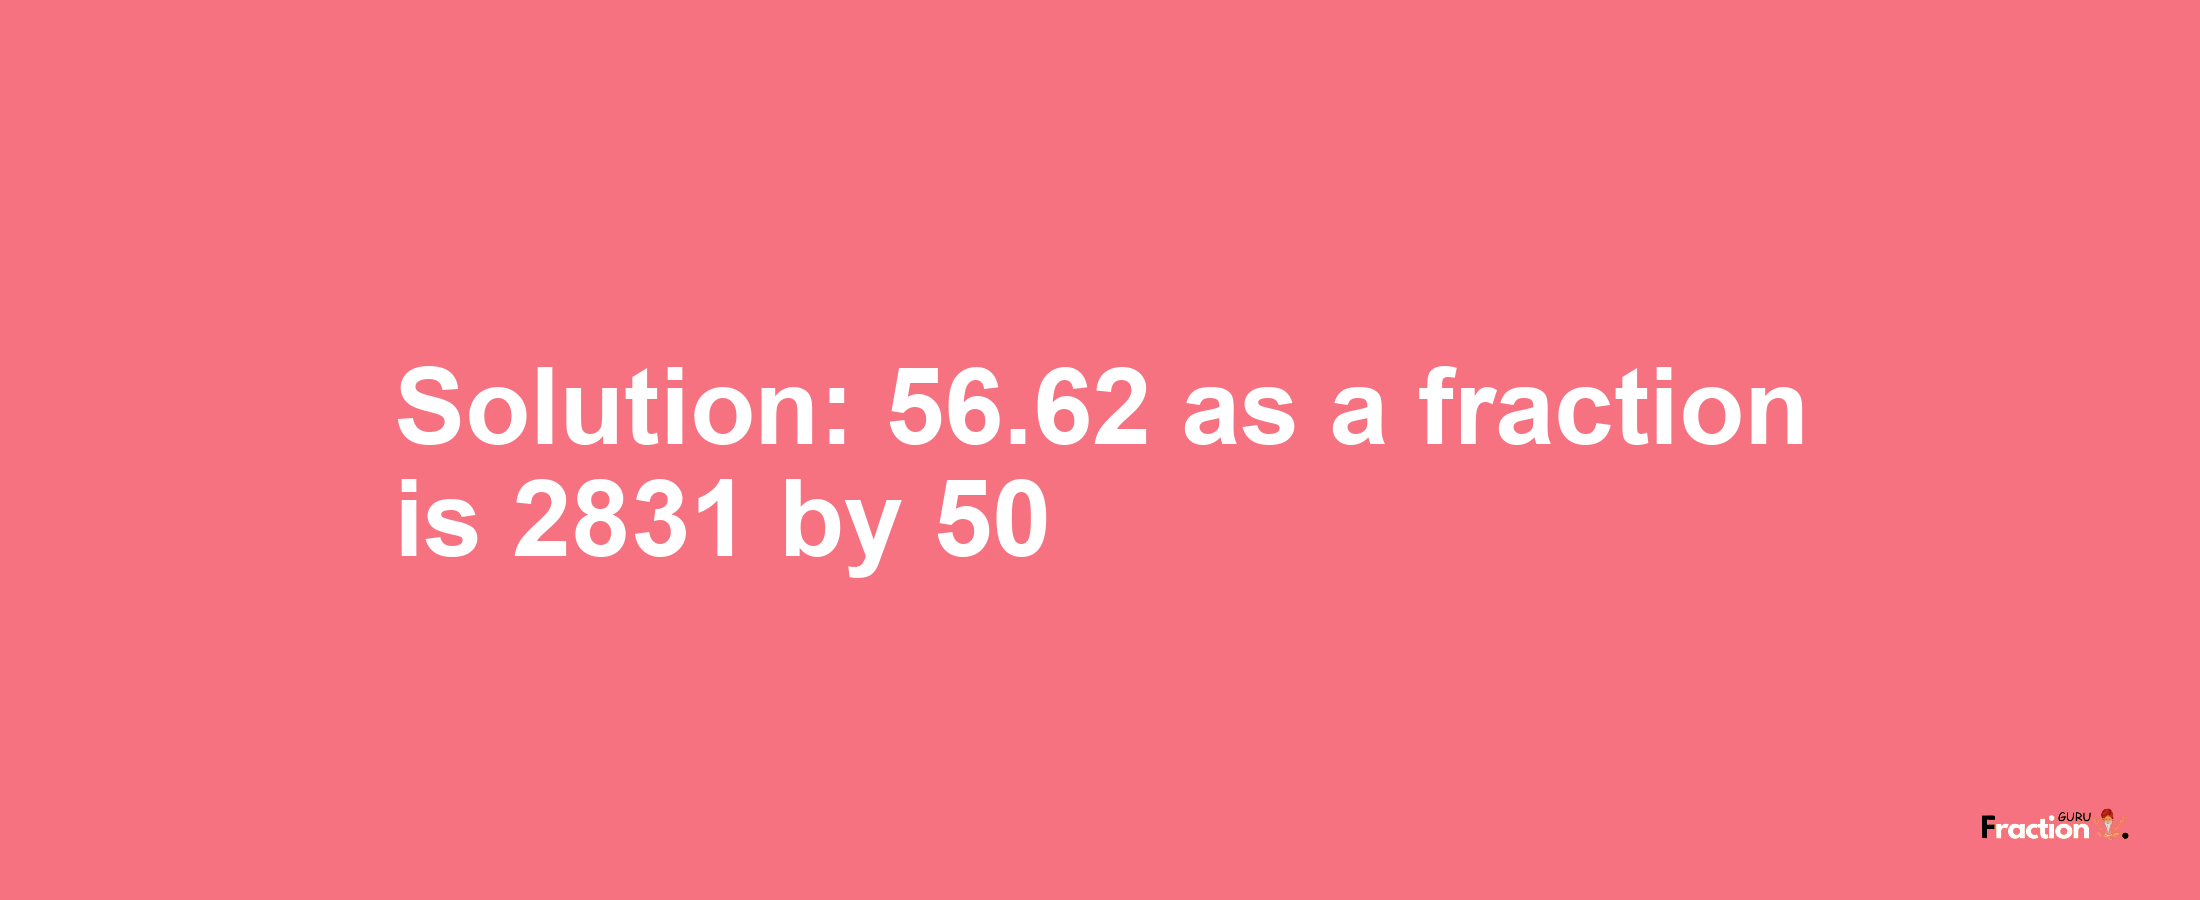 Solution:56.62 as a fraction is 2831/50